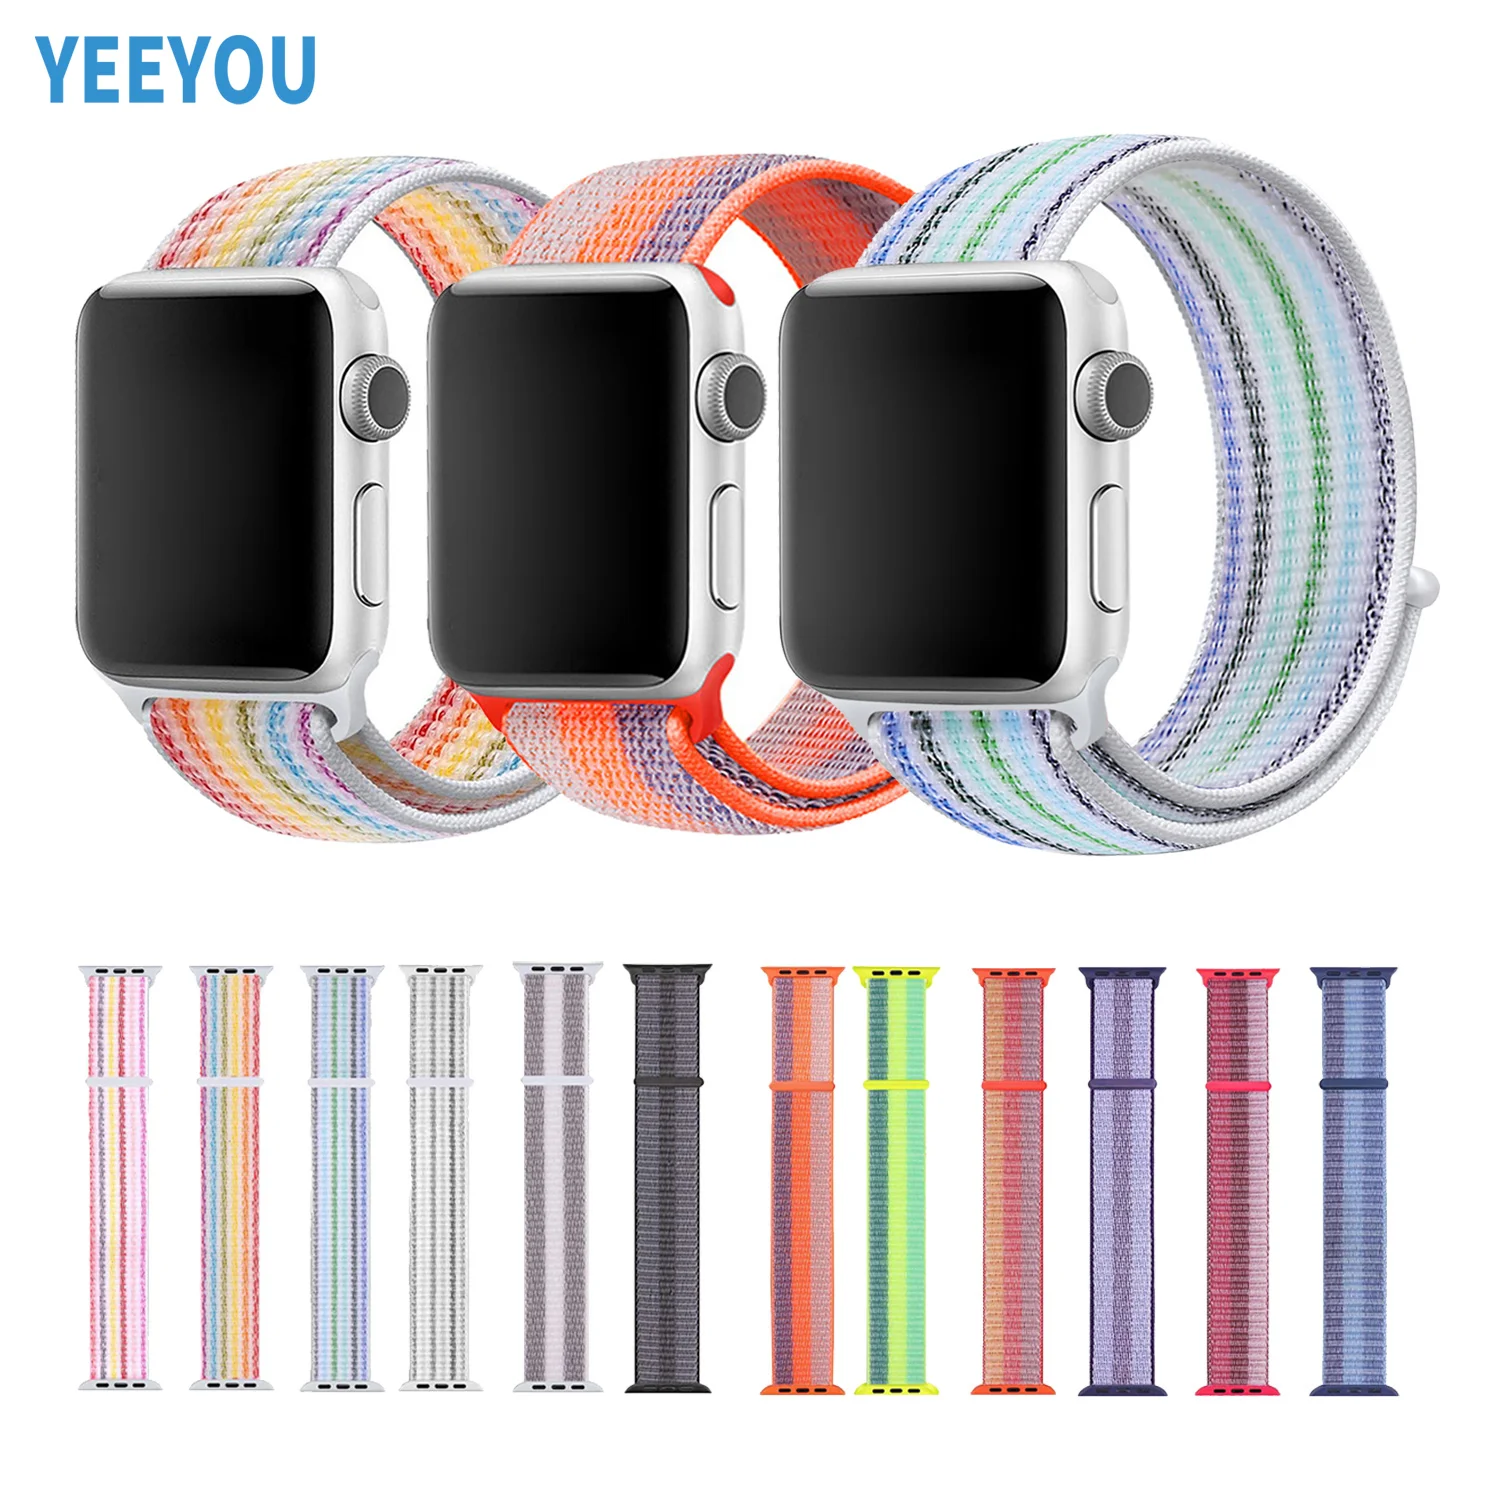 

YEEYOU Nylon Strap Woven Fabric For Apple Watch band 44mm 40mm 42mm 38mm Sport Loop Bracelet for iWatch Series 7 6 5 SE, Multi-color optional or customized